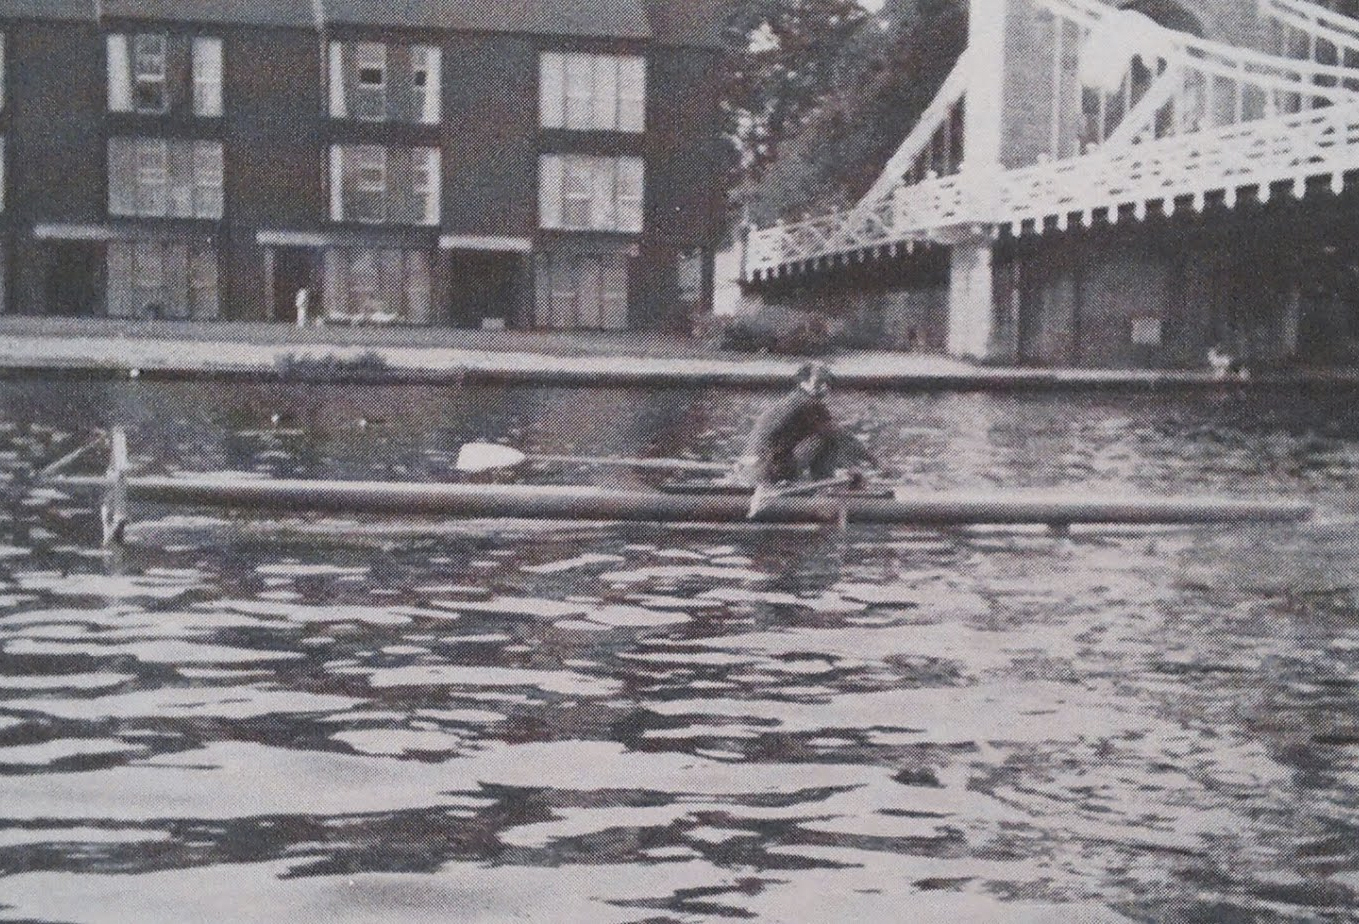 James Grogono lifted his rowed shell on hydrofoils in 1975